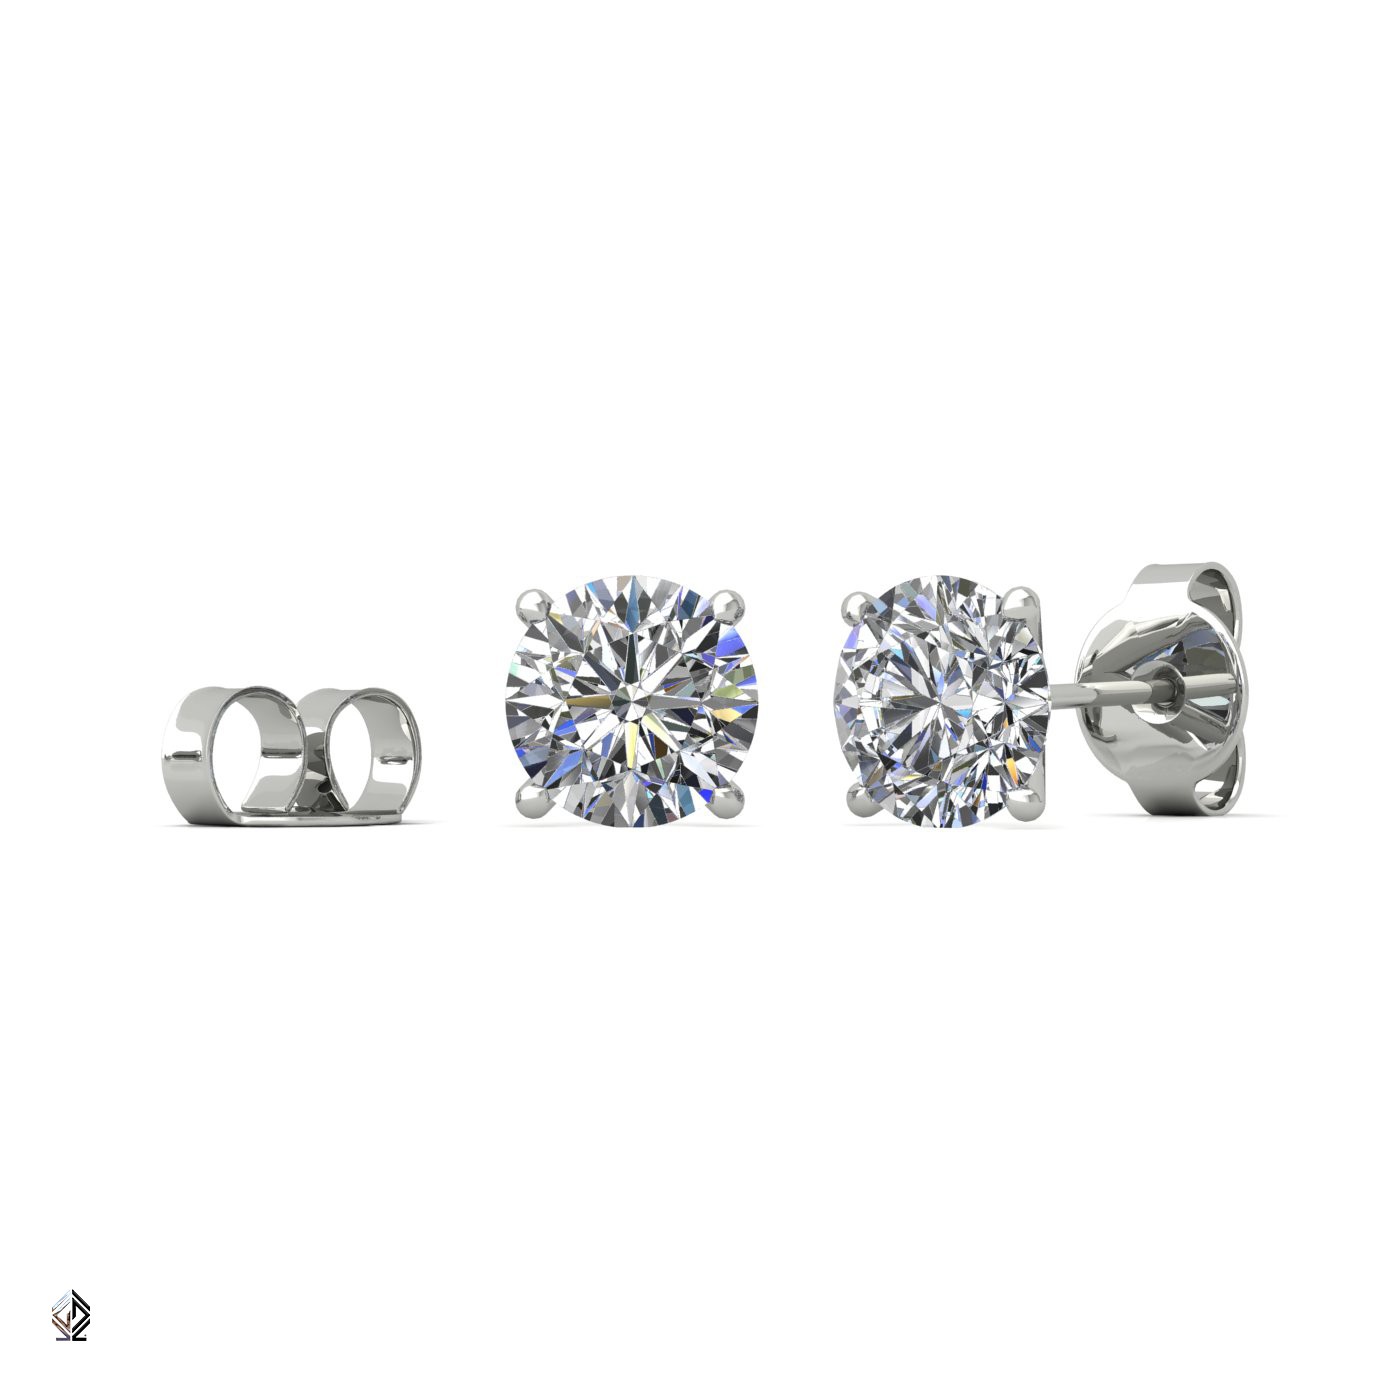 18k yellow gold 0,5 ct each (1,0 tcw) 4 prongs round cut classic diamond earring studs Photos & images